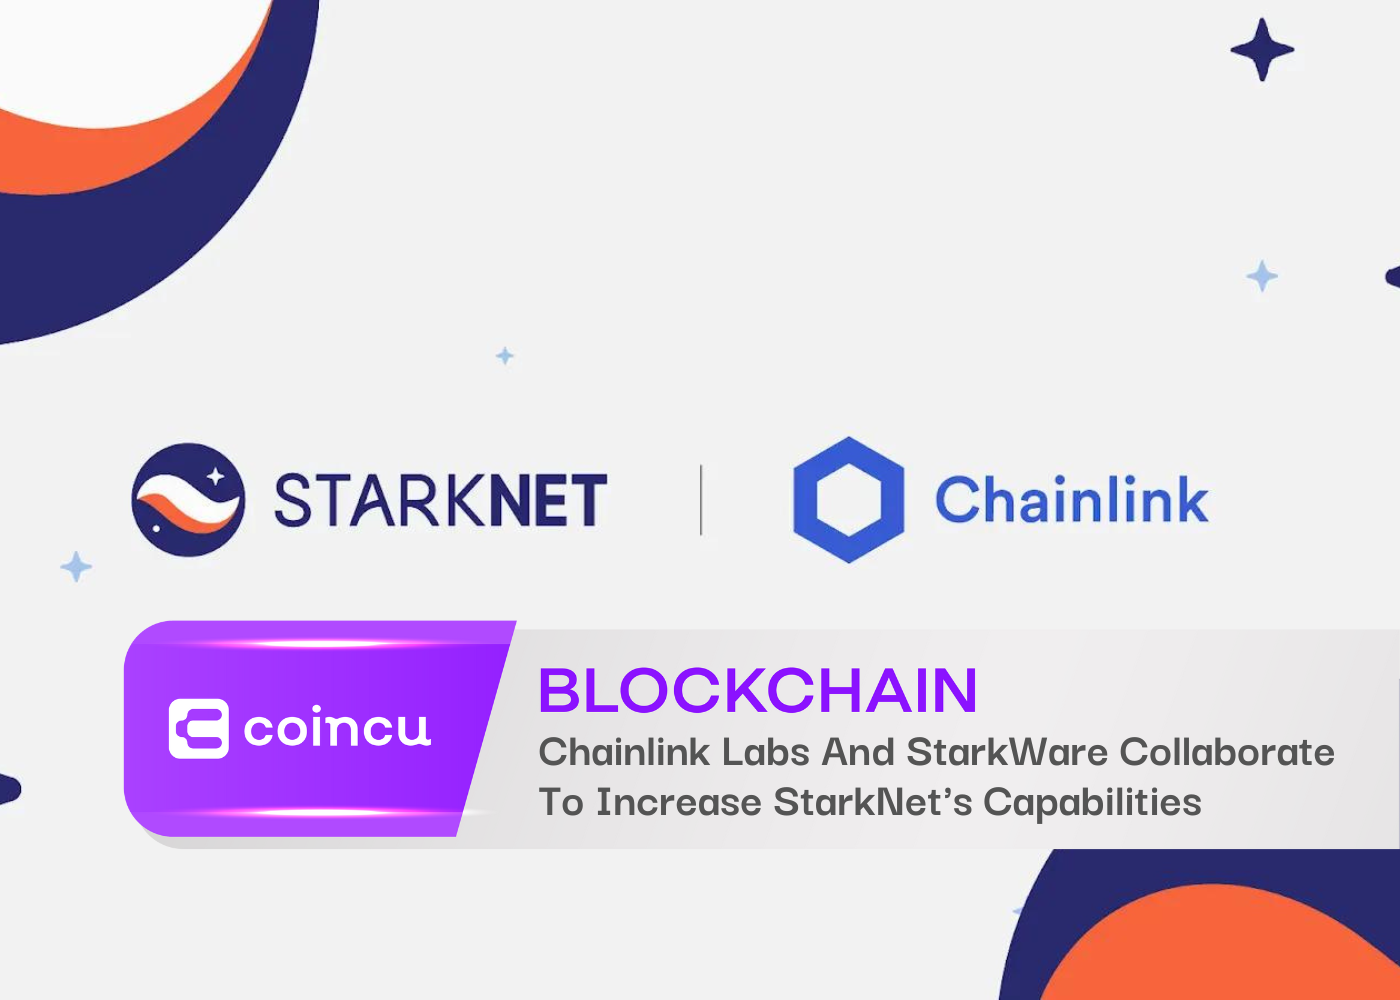 Chainlink Labs And StarkWare Collaborate